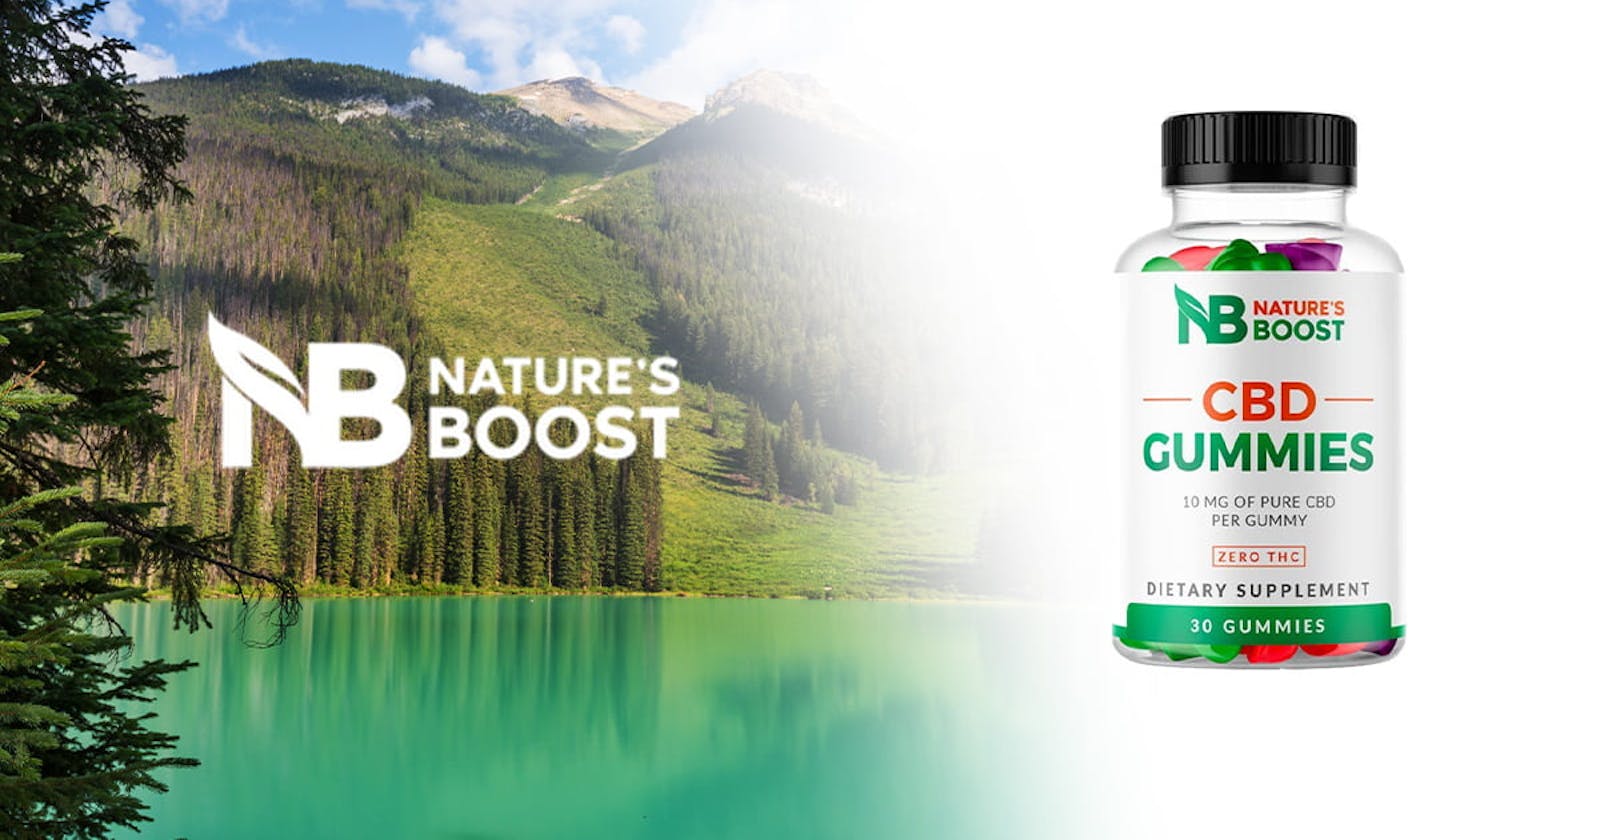 Natures Boost CBD Gummies Is Scam Or Trusted? Understand More! Price Where to get it?